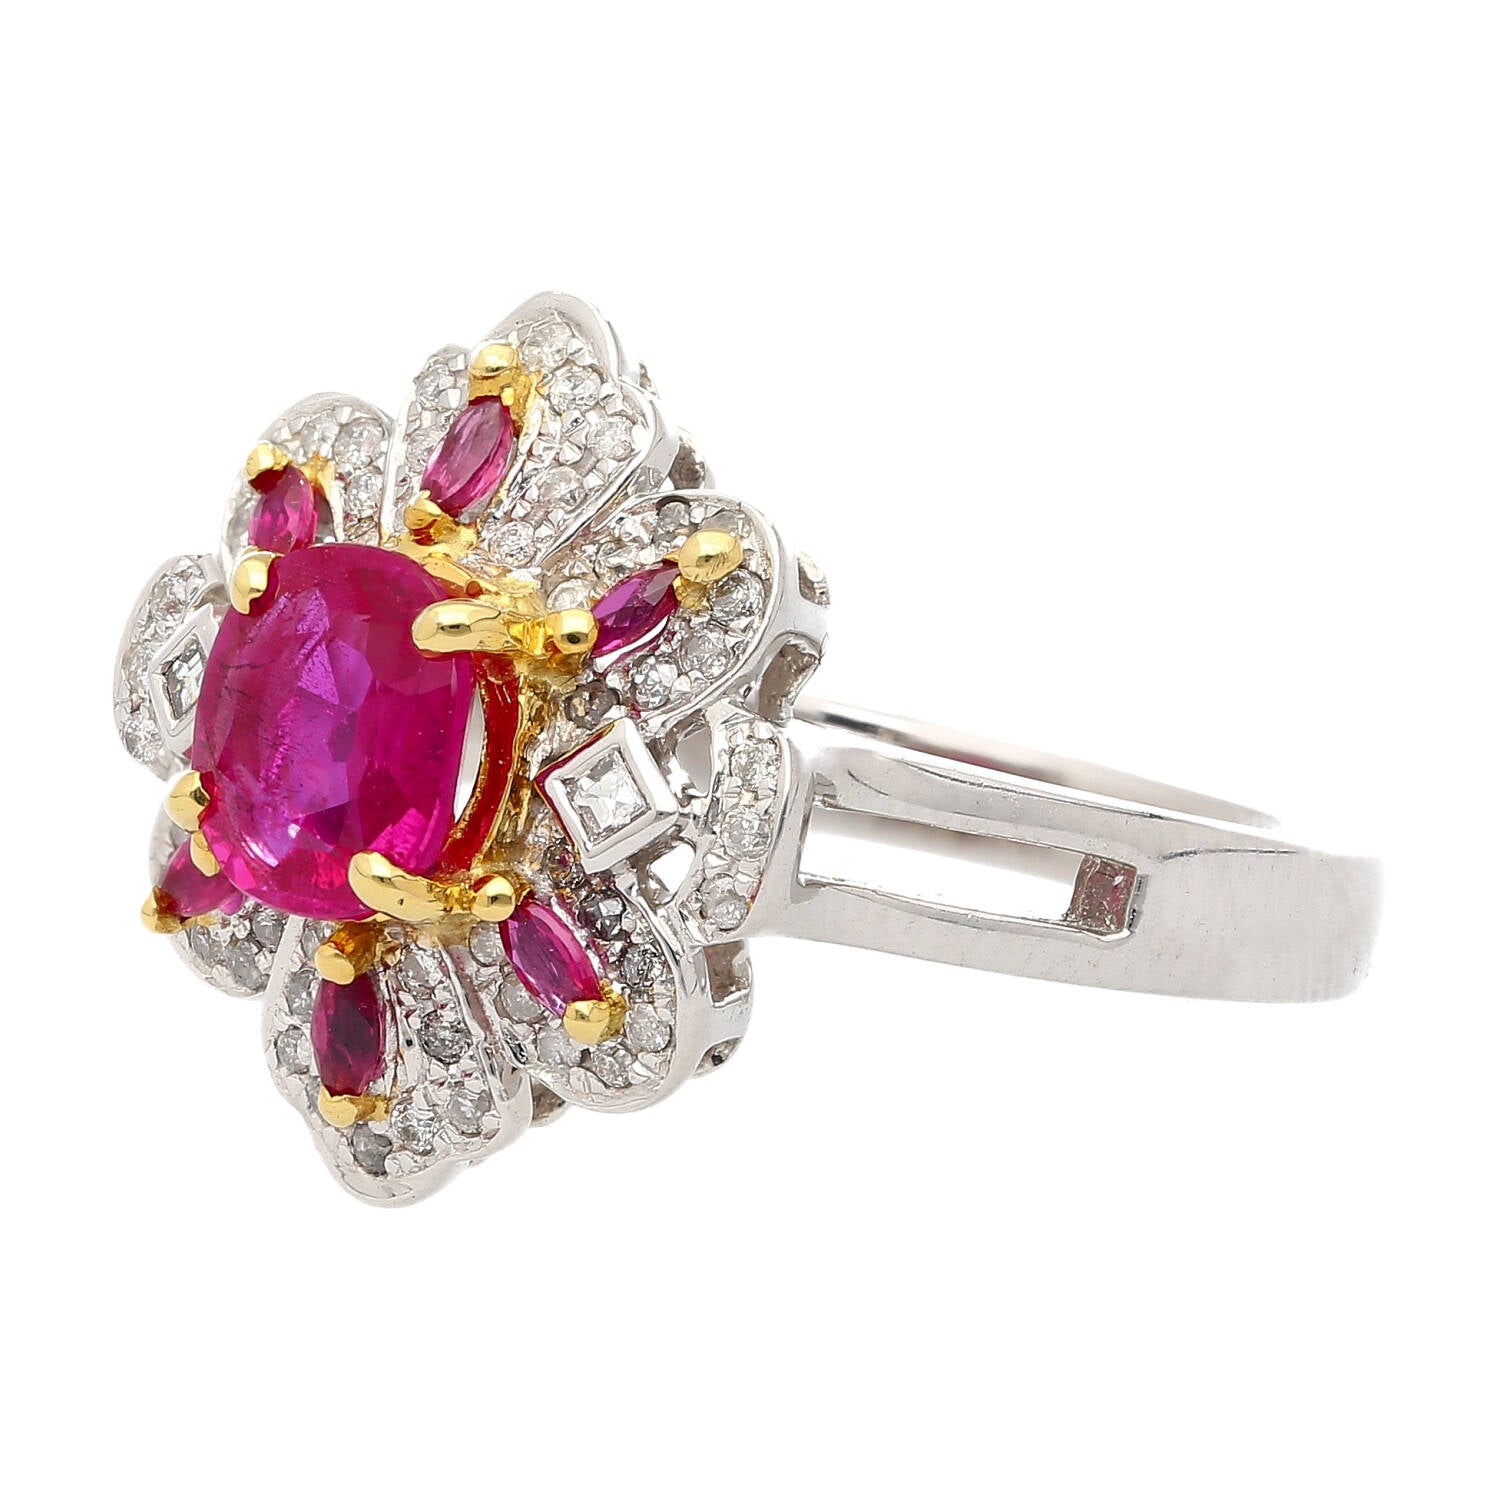 1.38 CTTW Natural Pinkish Red Ruby & Diamond Floral Motif Ring in 14K White Gold